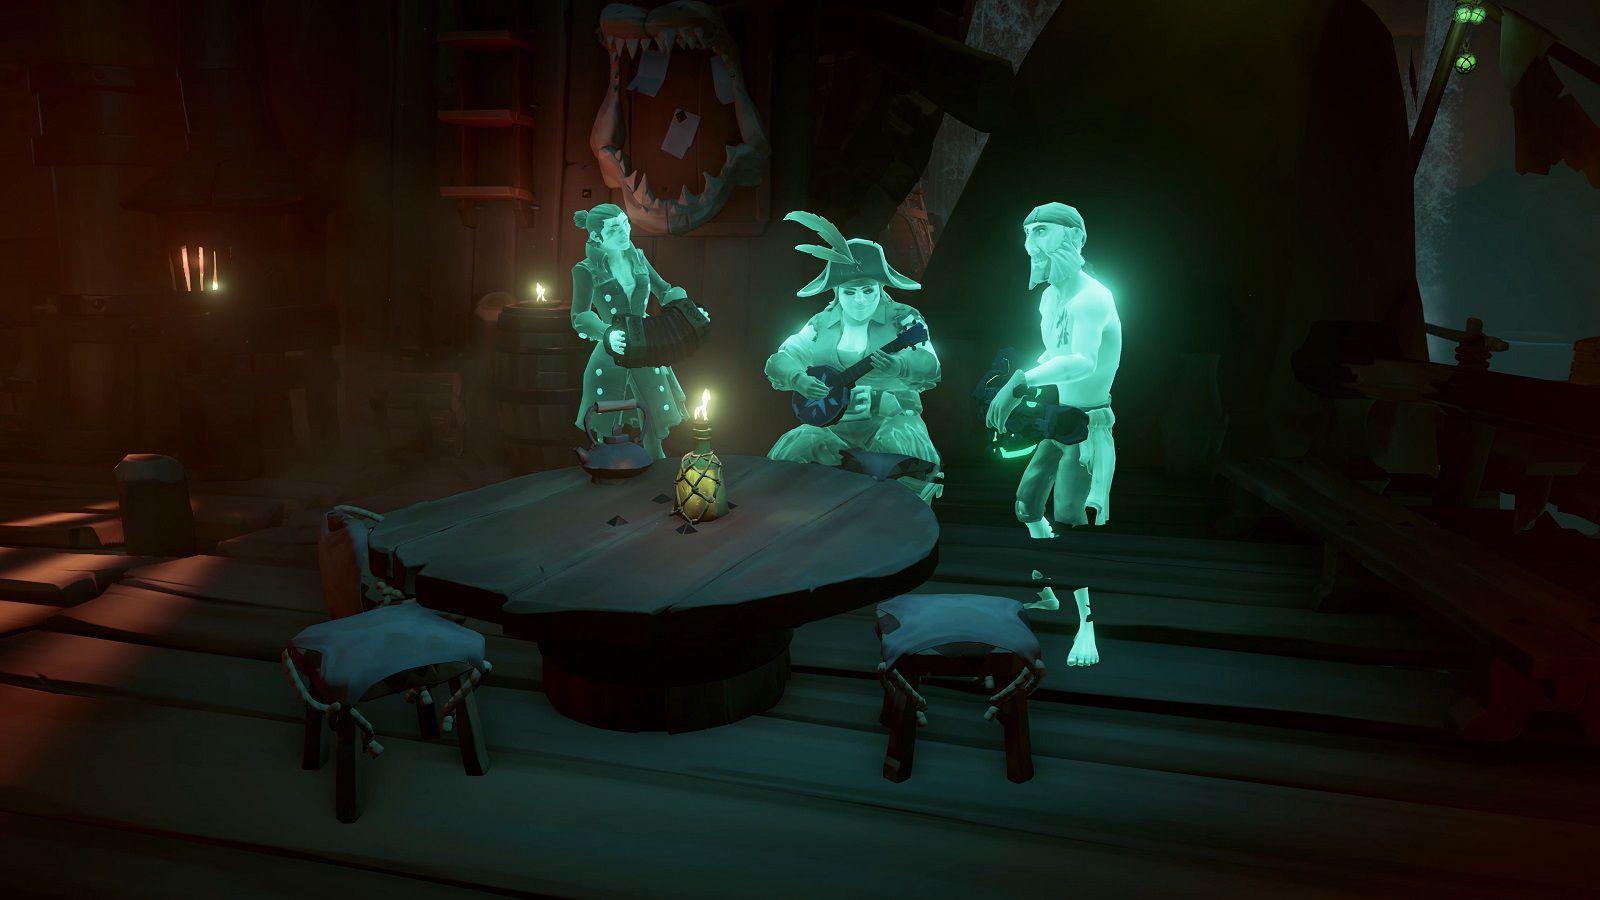 Here's what you can do in 'Sea of Thieves' that you couldn't in